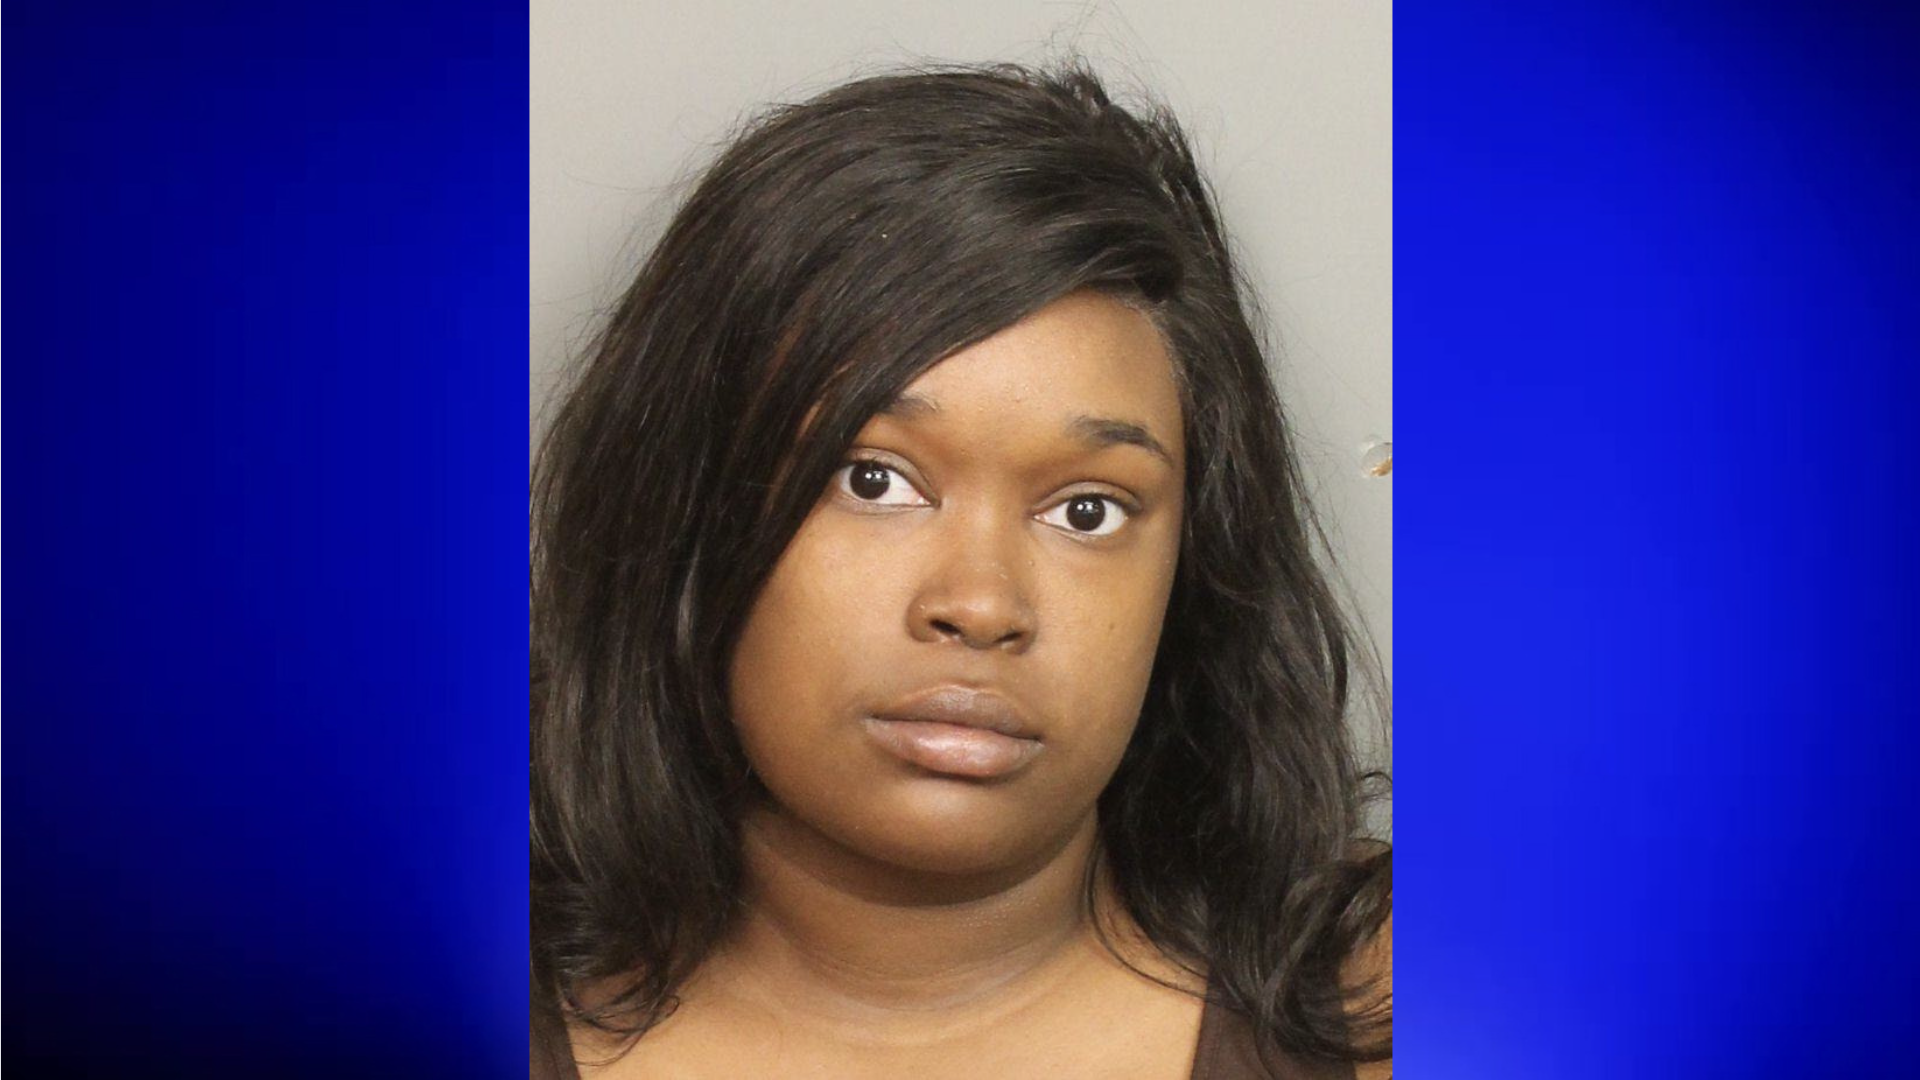 Woman arrested in connection with March 7 Birmingham shooting